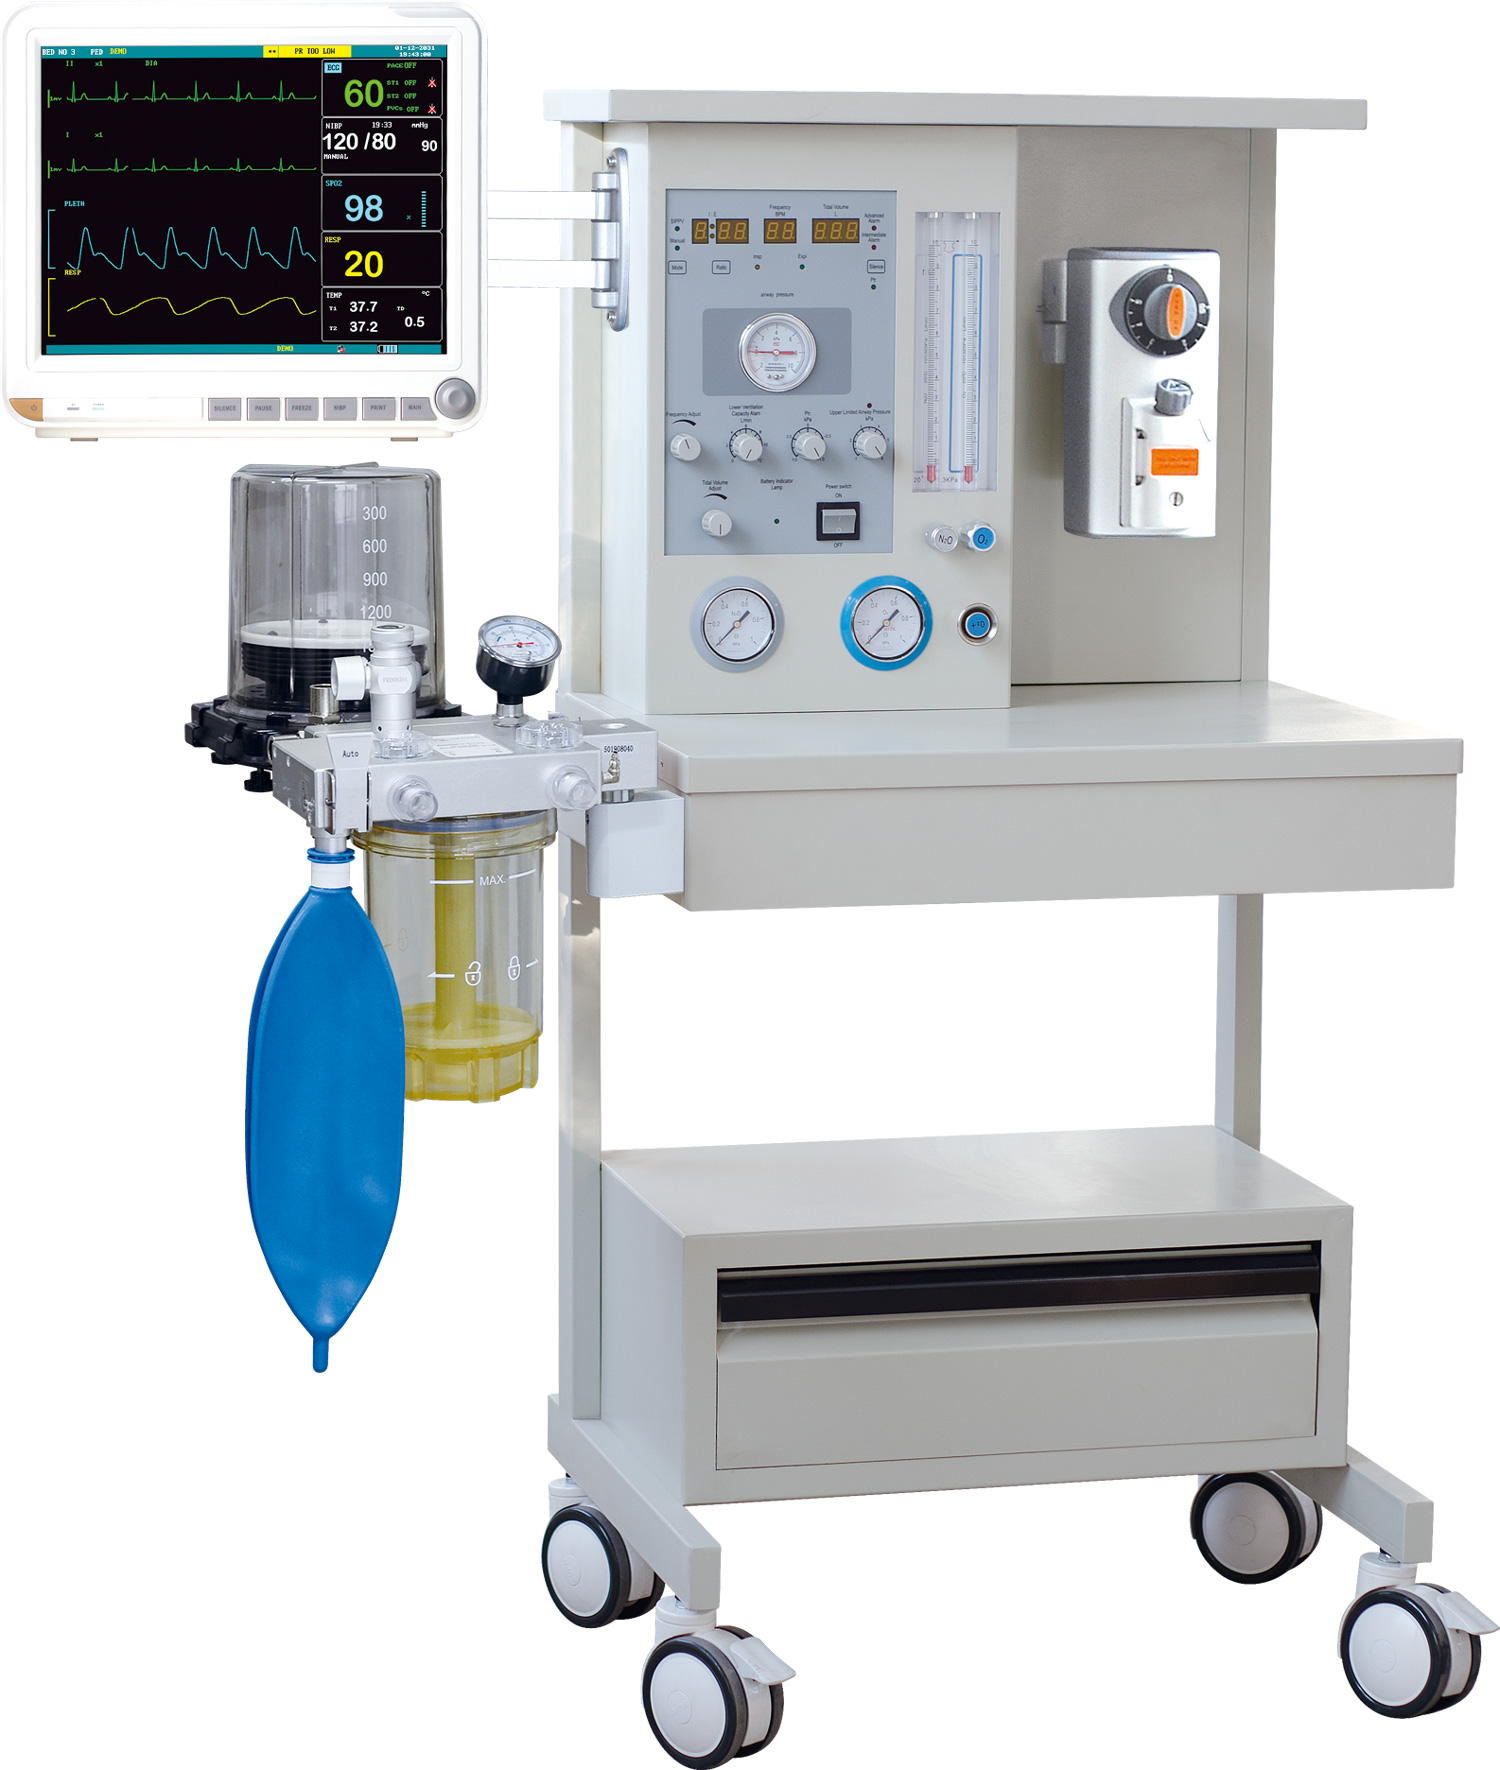 Medical Equipment Breathing Anesthesia / Anesthesia machine / Anesthesia Unit for Treatment